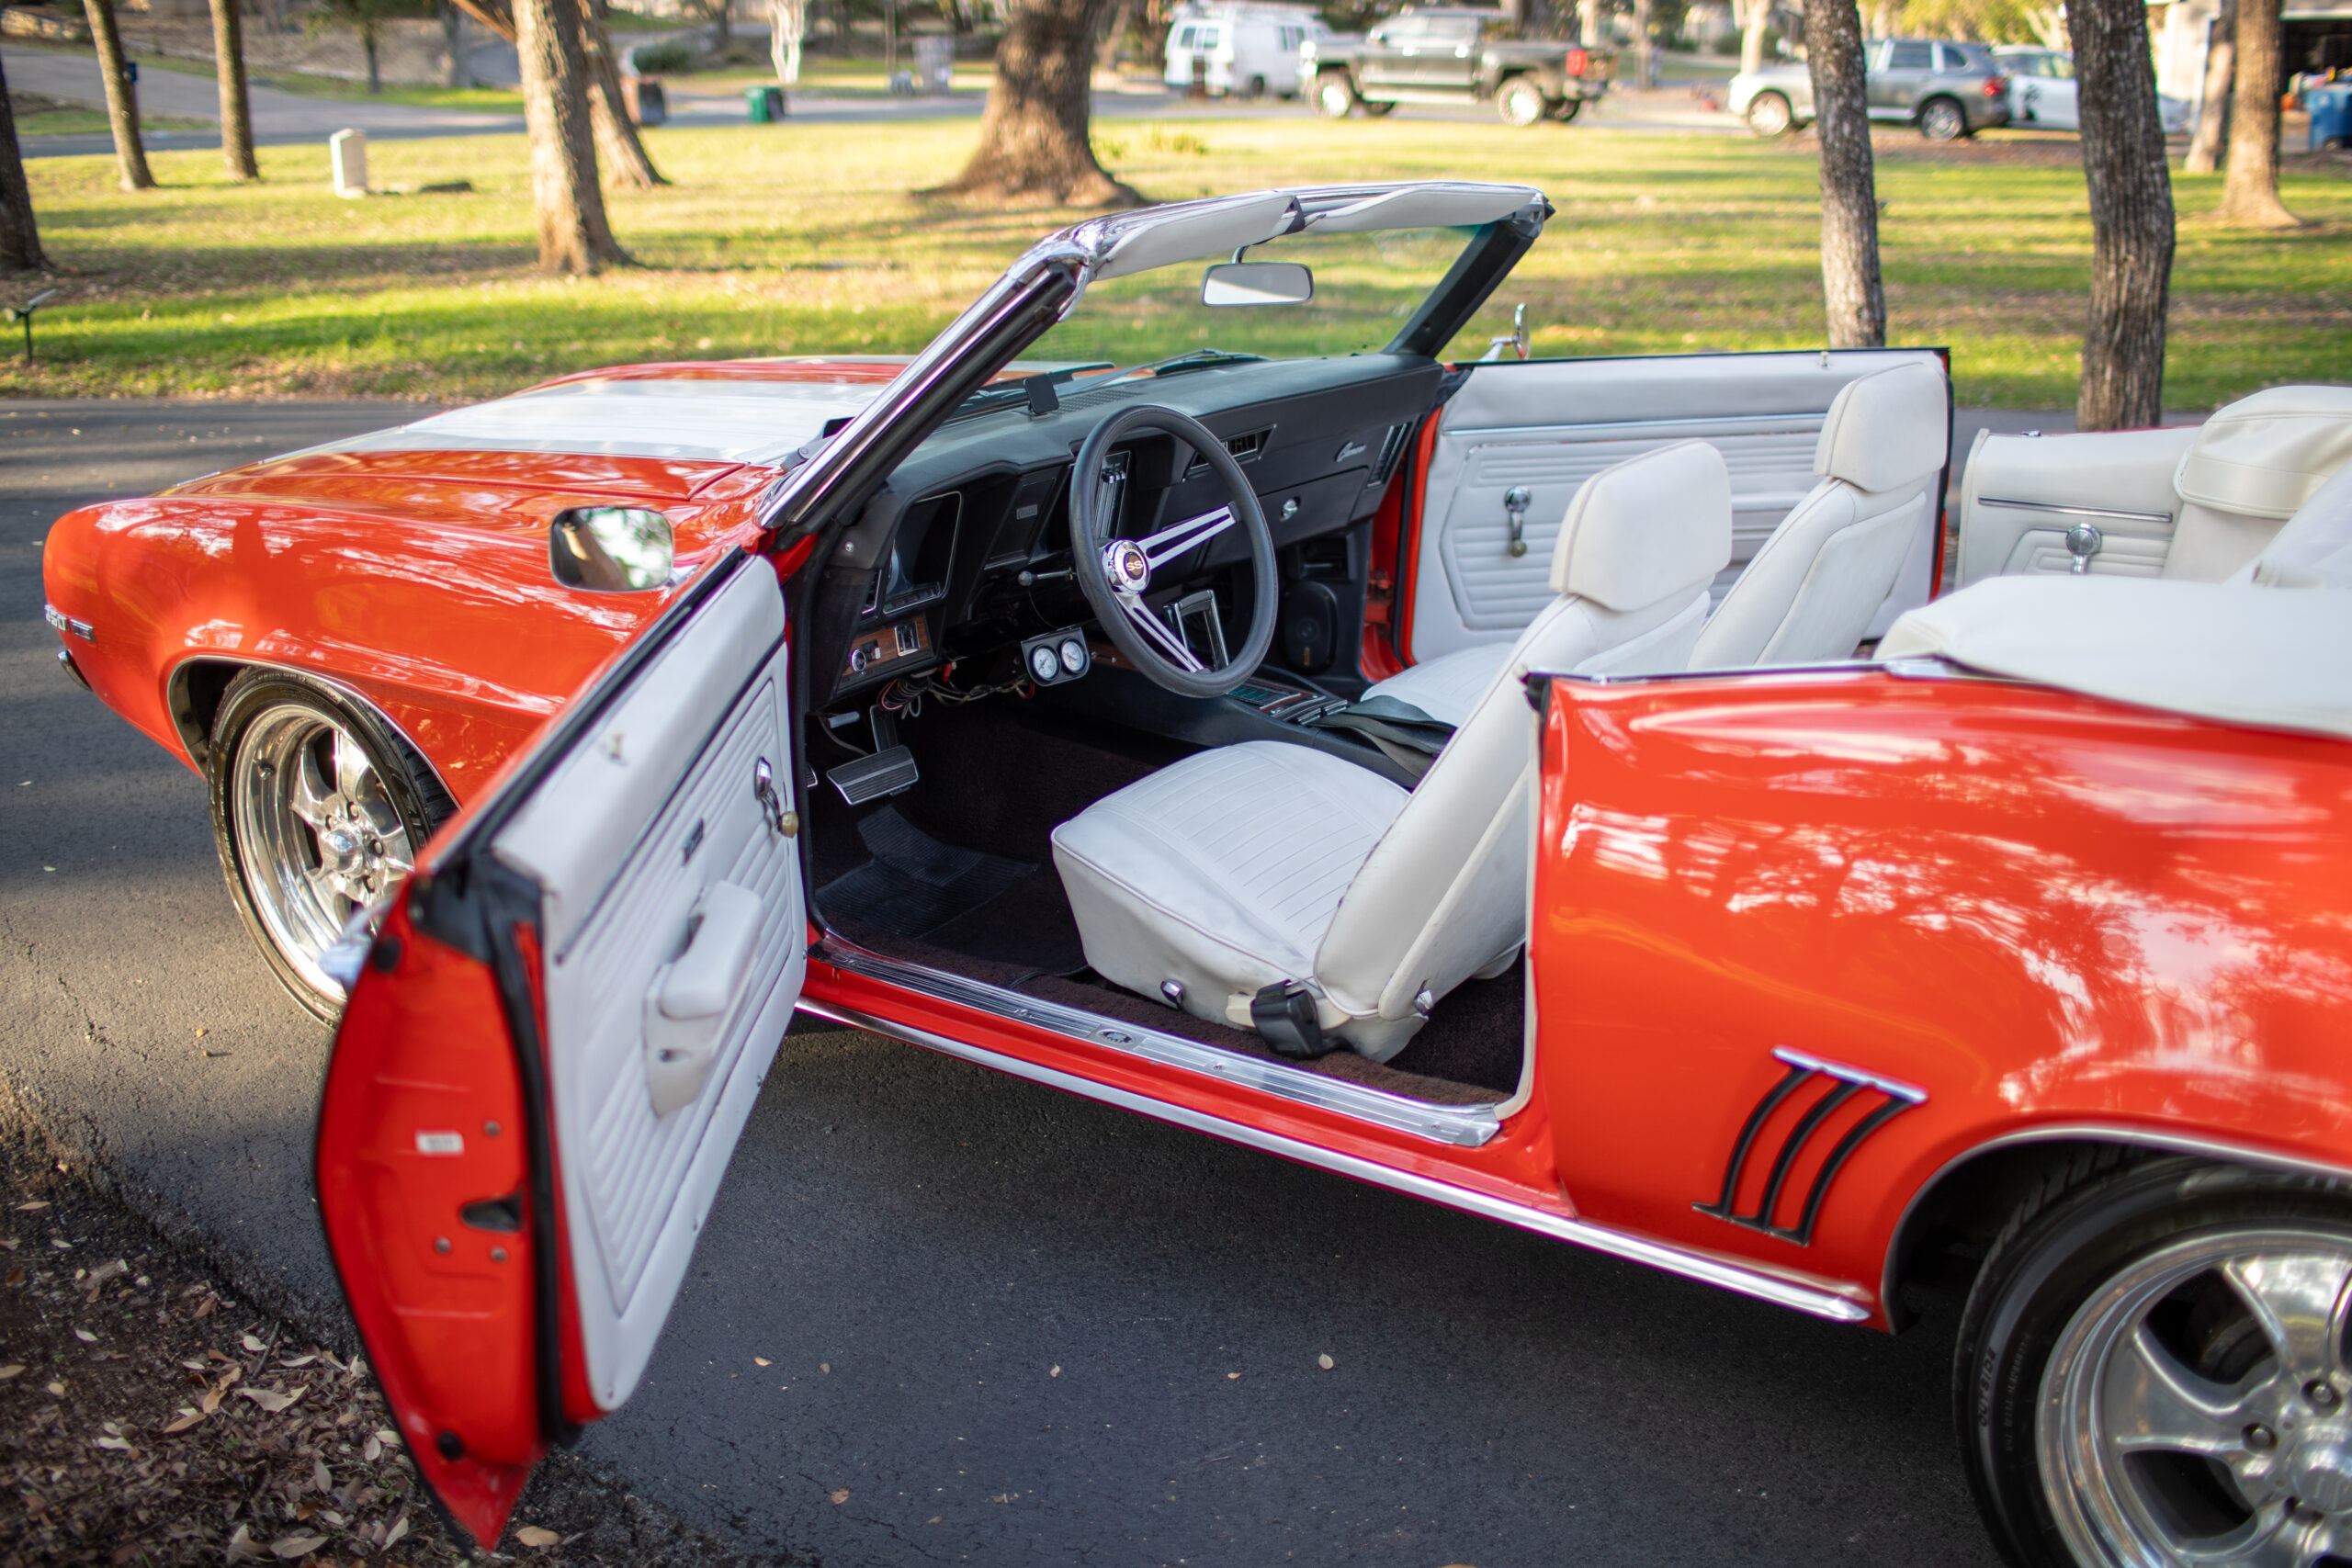 A red convertible car with its driver's side door open, revealing a white interior and a vintage dashboard, is parked on a paved road in a park with trees and other parked vehicles in the background.